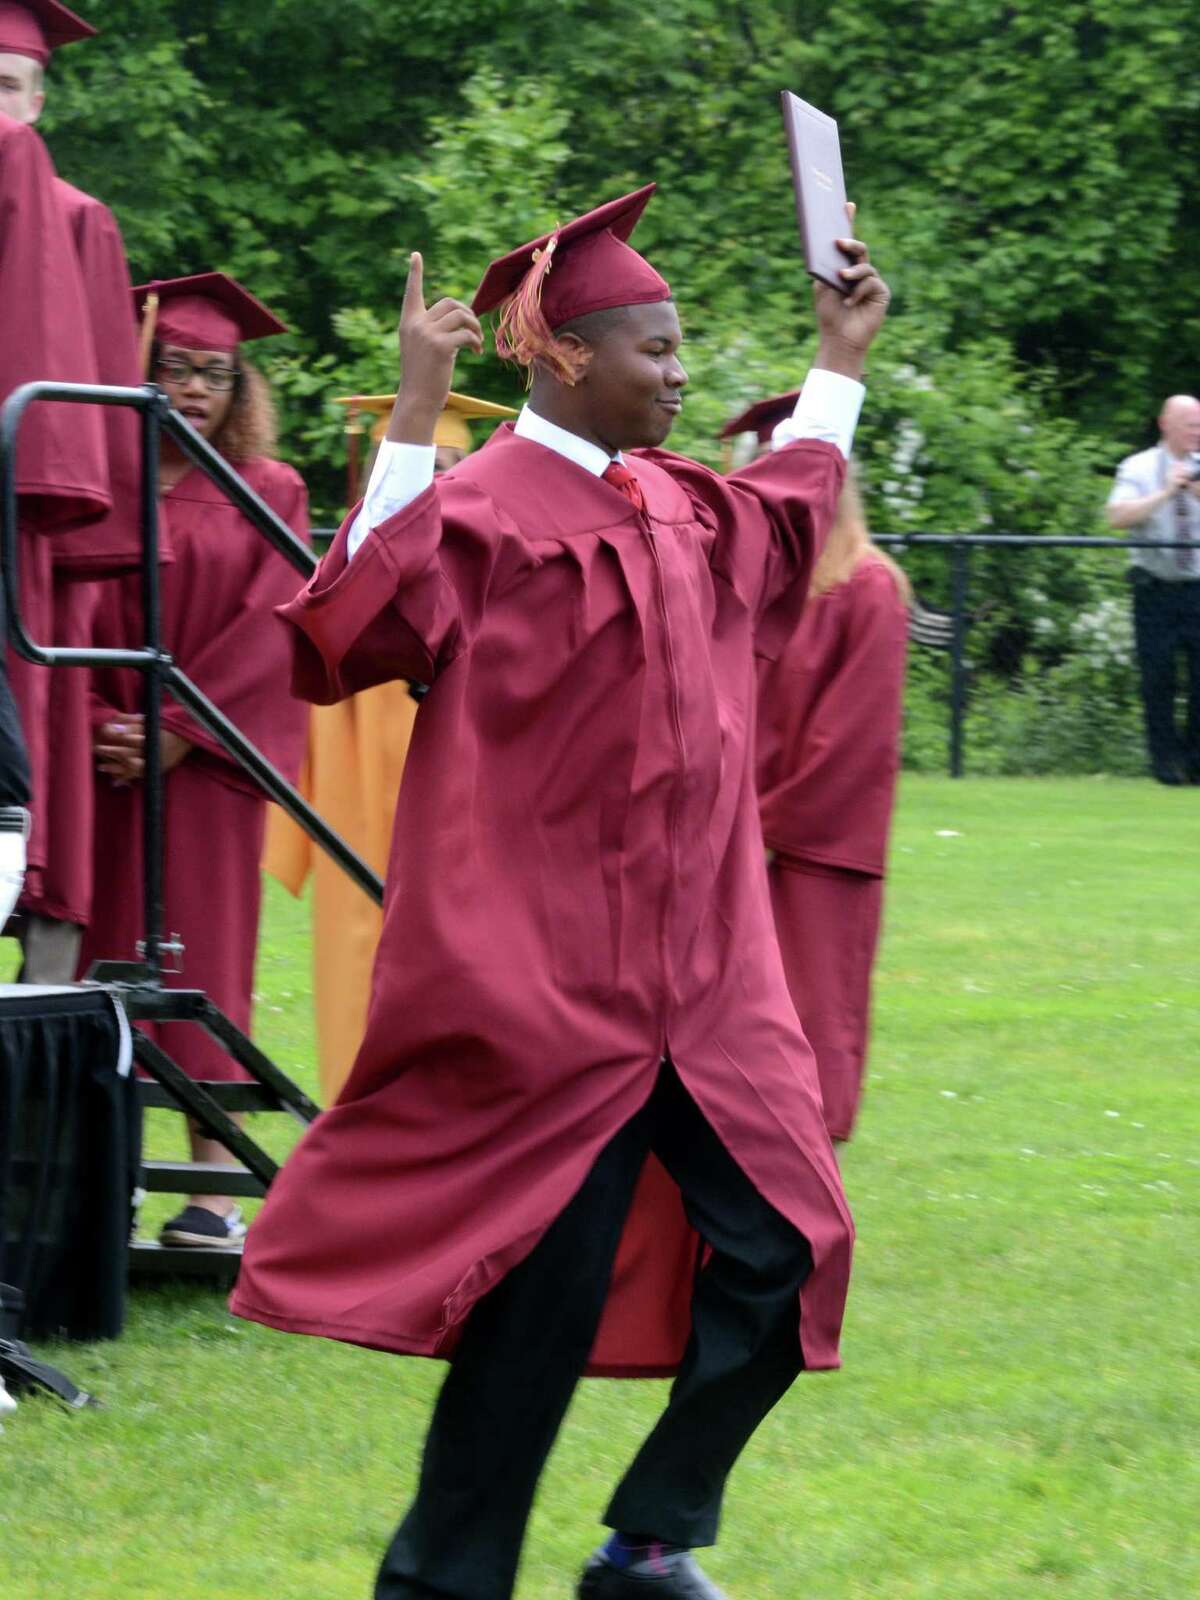 Myles Antoney Gee breaks out in dance on his way back to his seat after receiving his diploma. St. Josephs High School in Trumbull, Conn. Graduation ceremony took place at their campus on Sat. June 4, 2016.